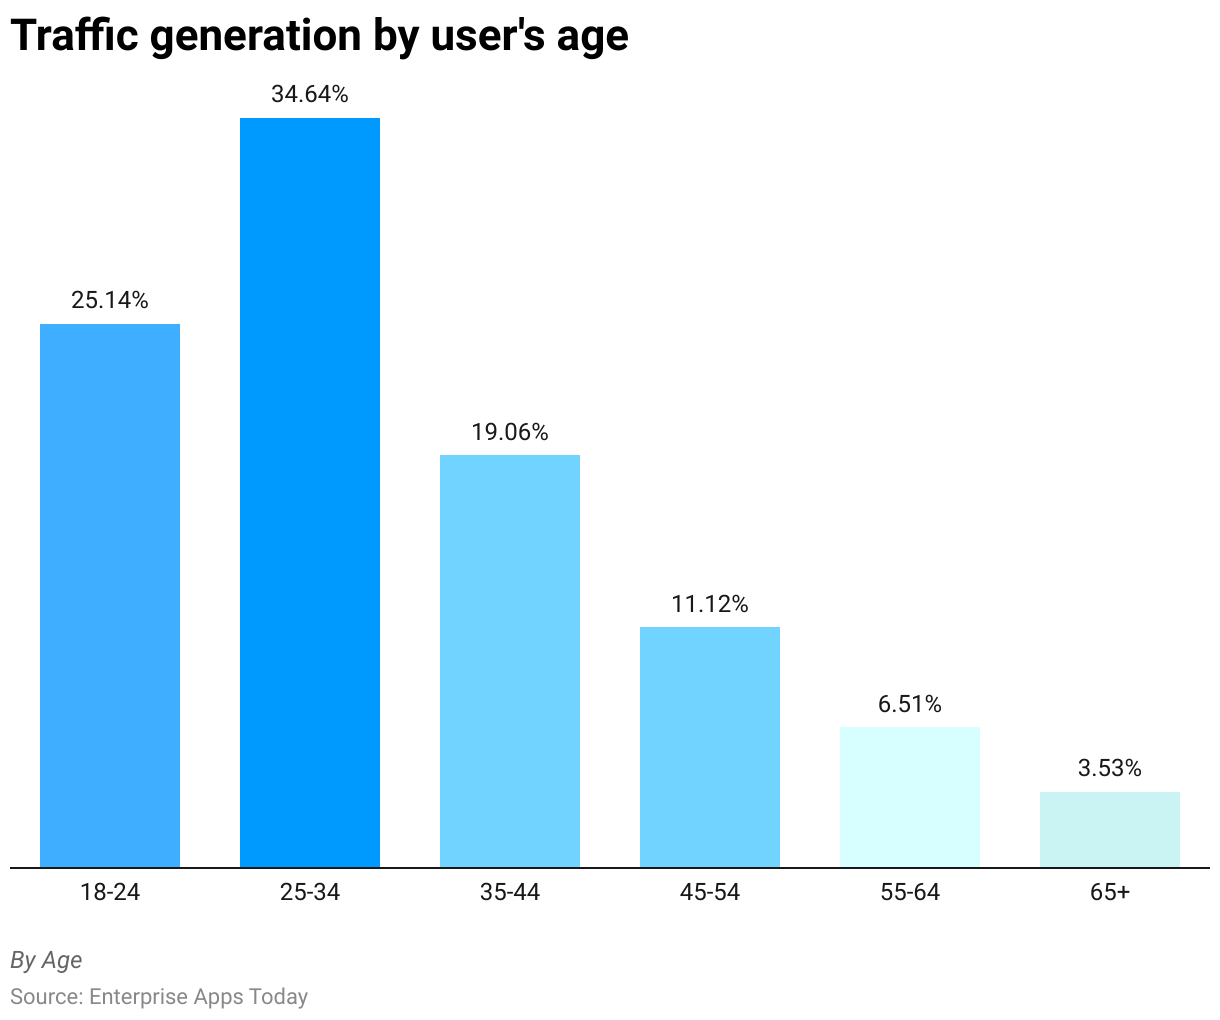 Traffic generation by user's age
